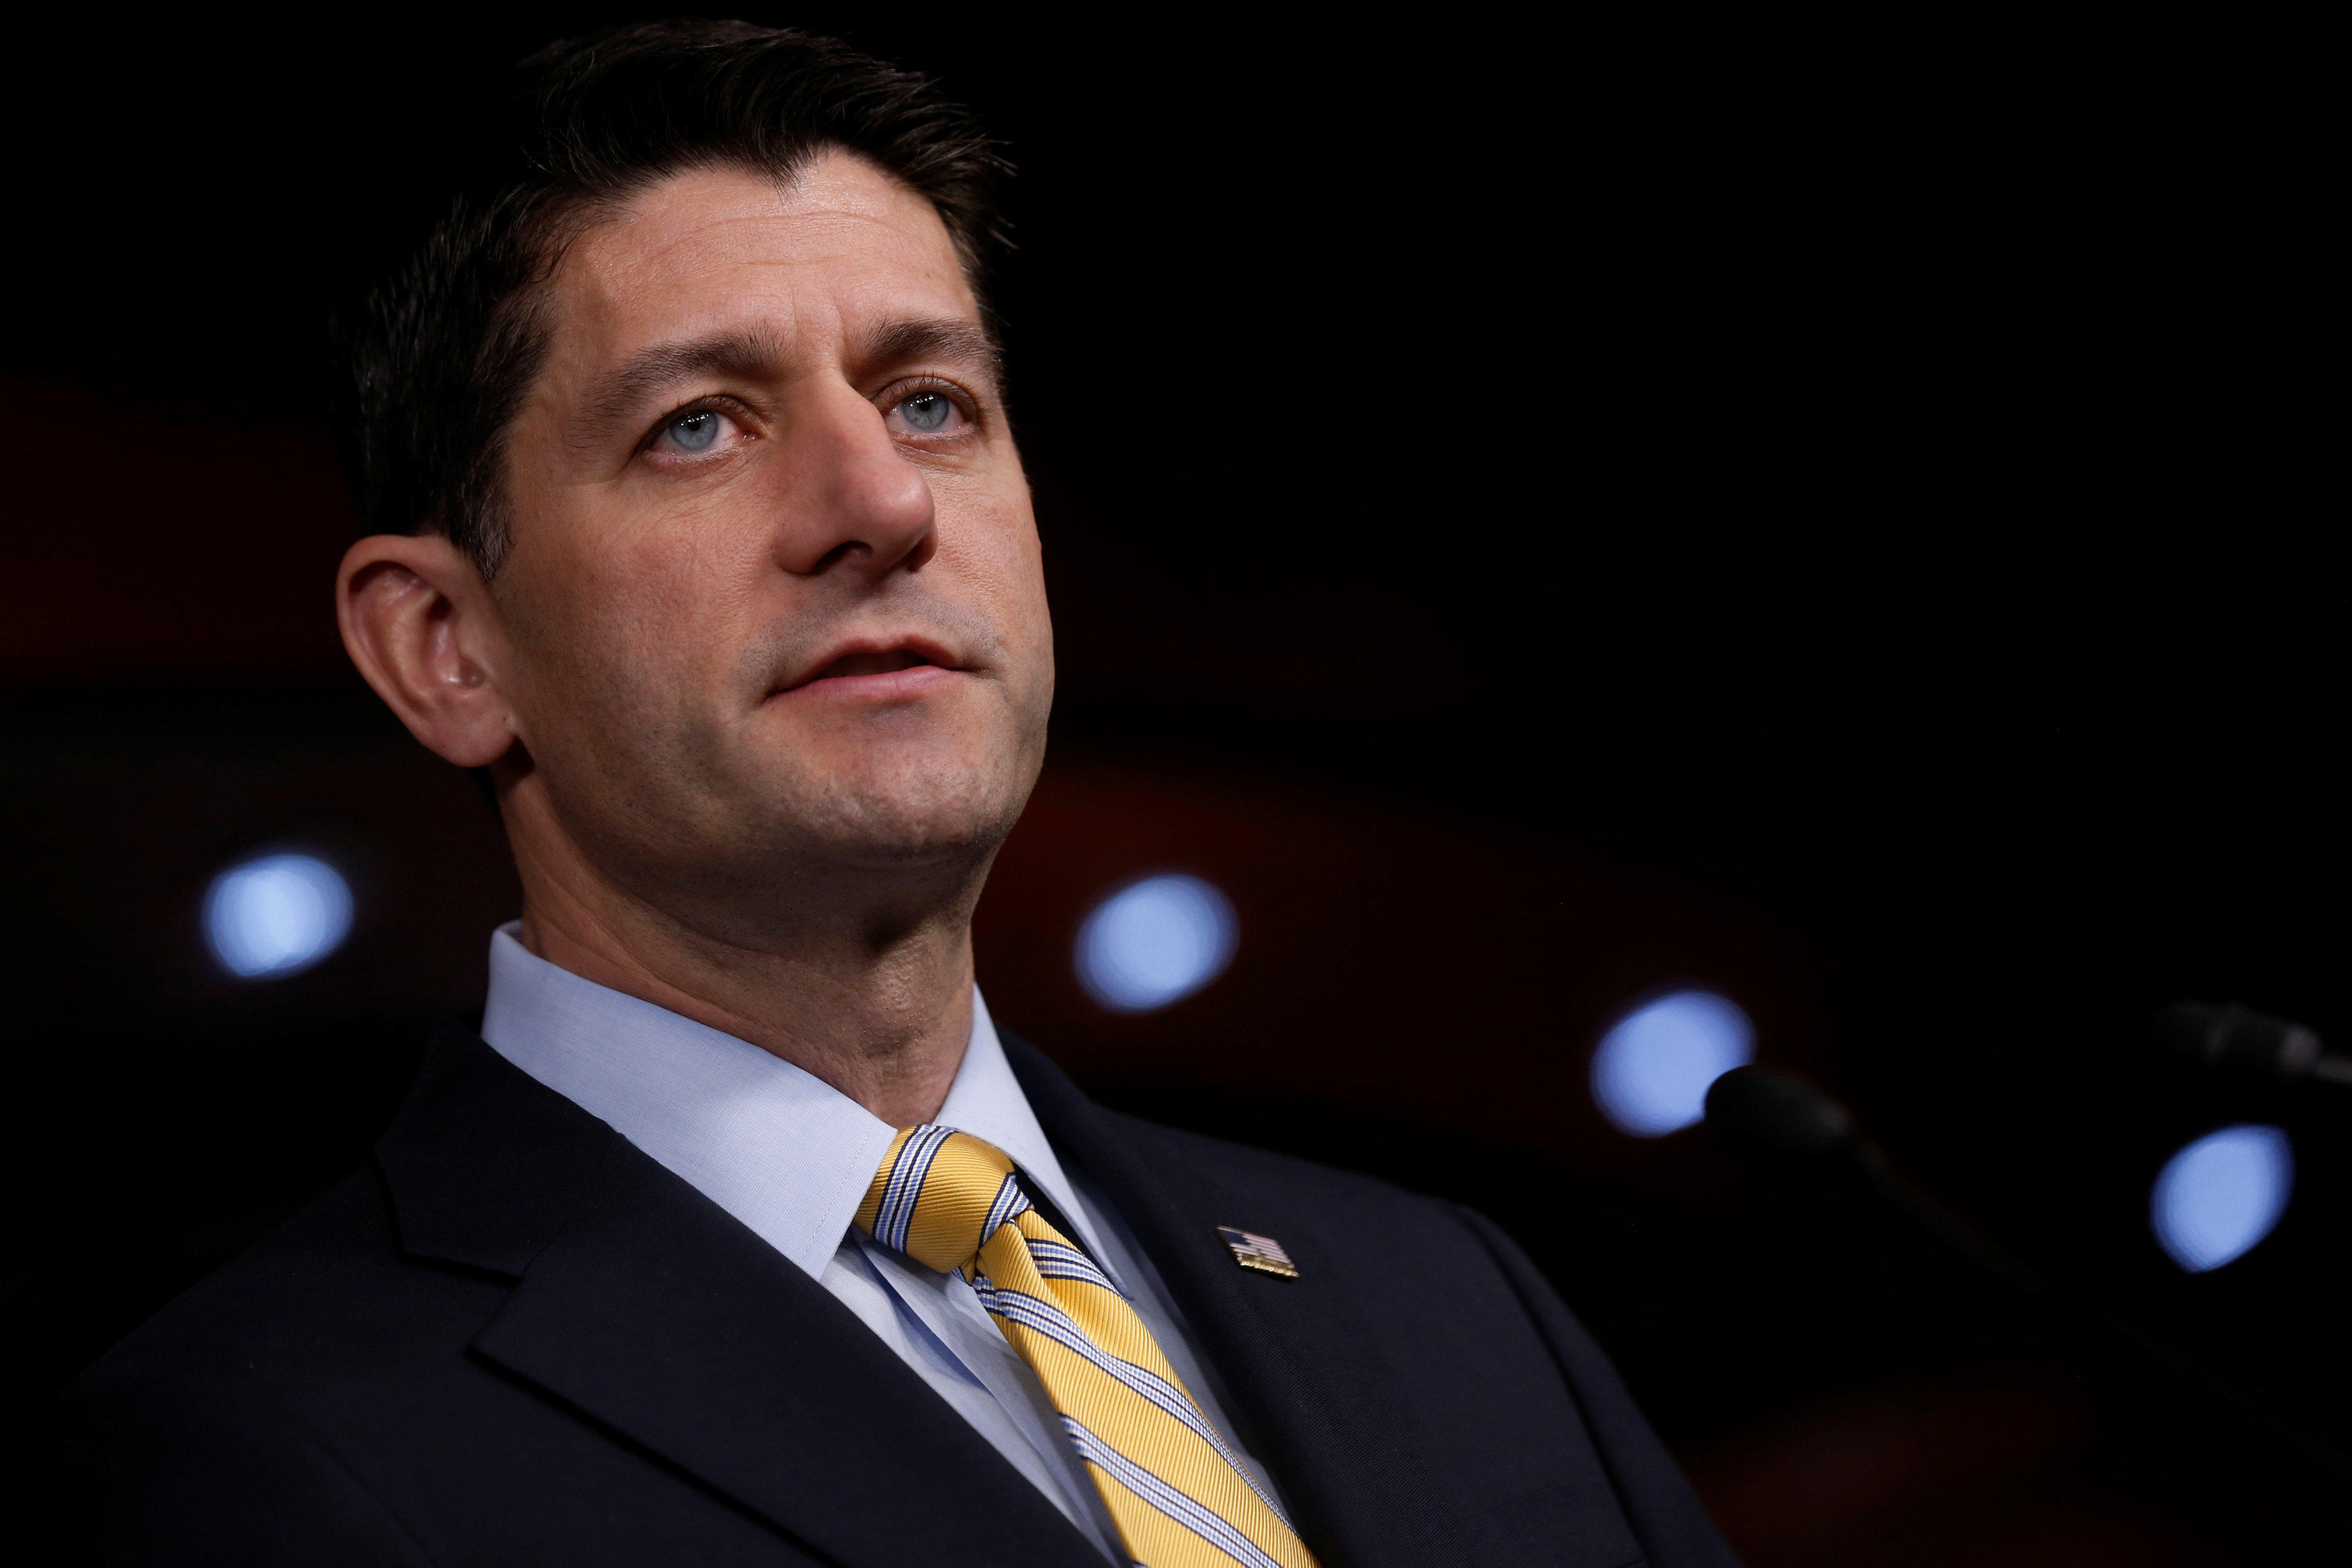 Paul Ryan indicates GOP will strip federal funding from Planned Parenthood - CBS News